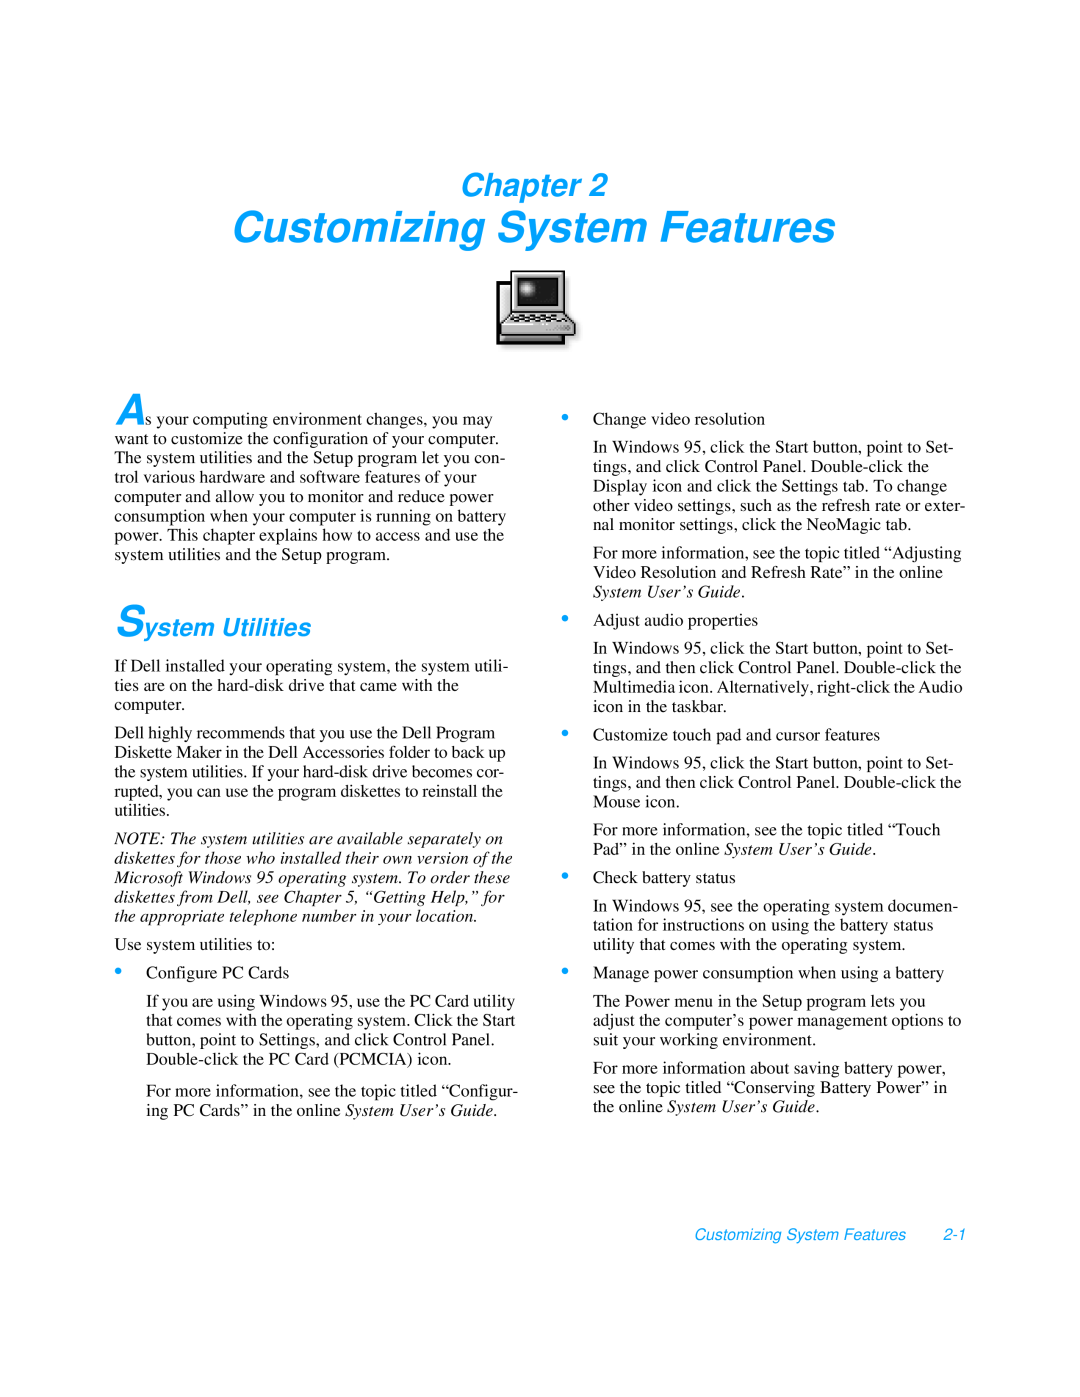 Dell 3000 manual Customizing System Features, System Utilities, Chapter 